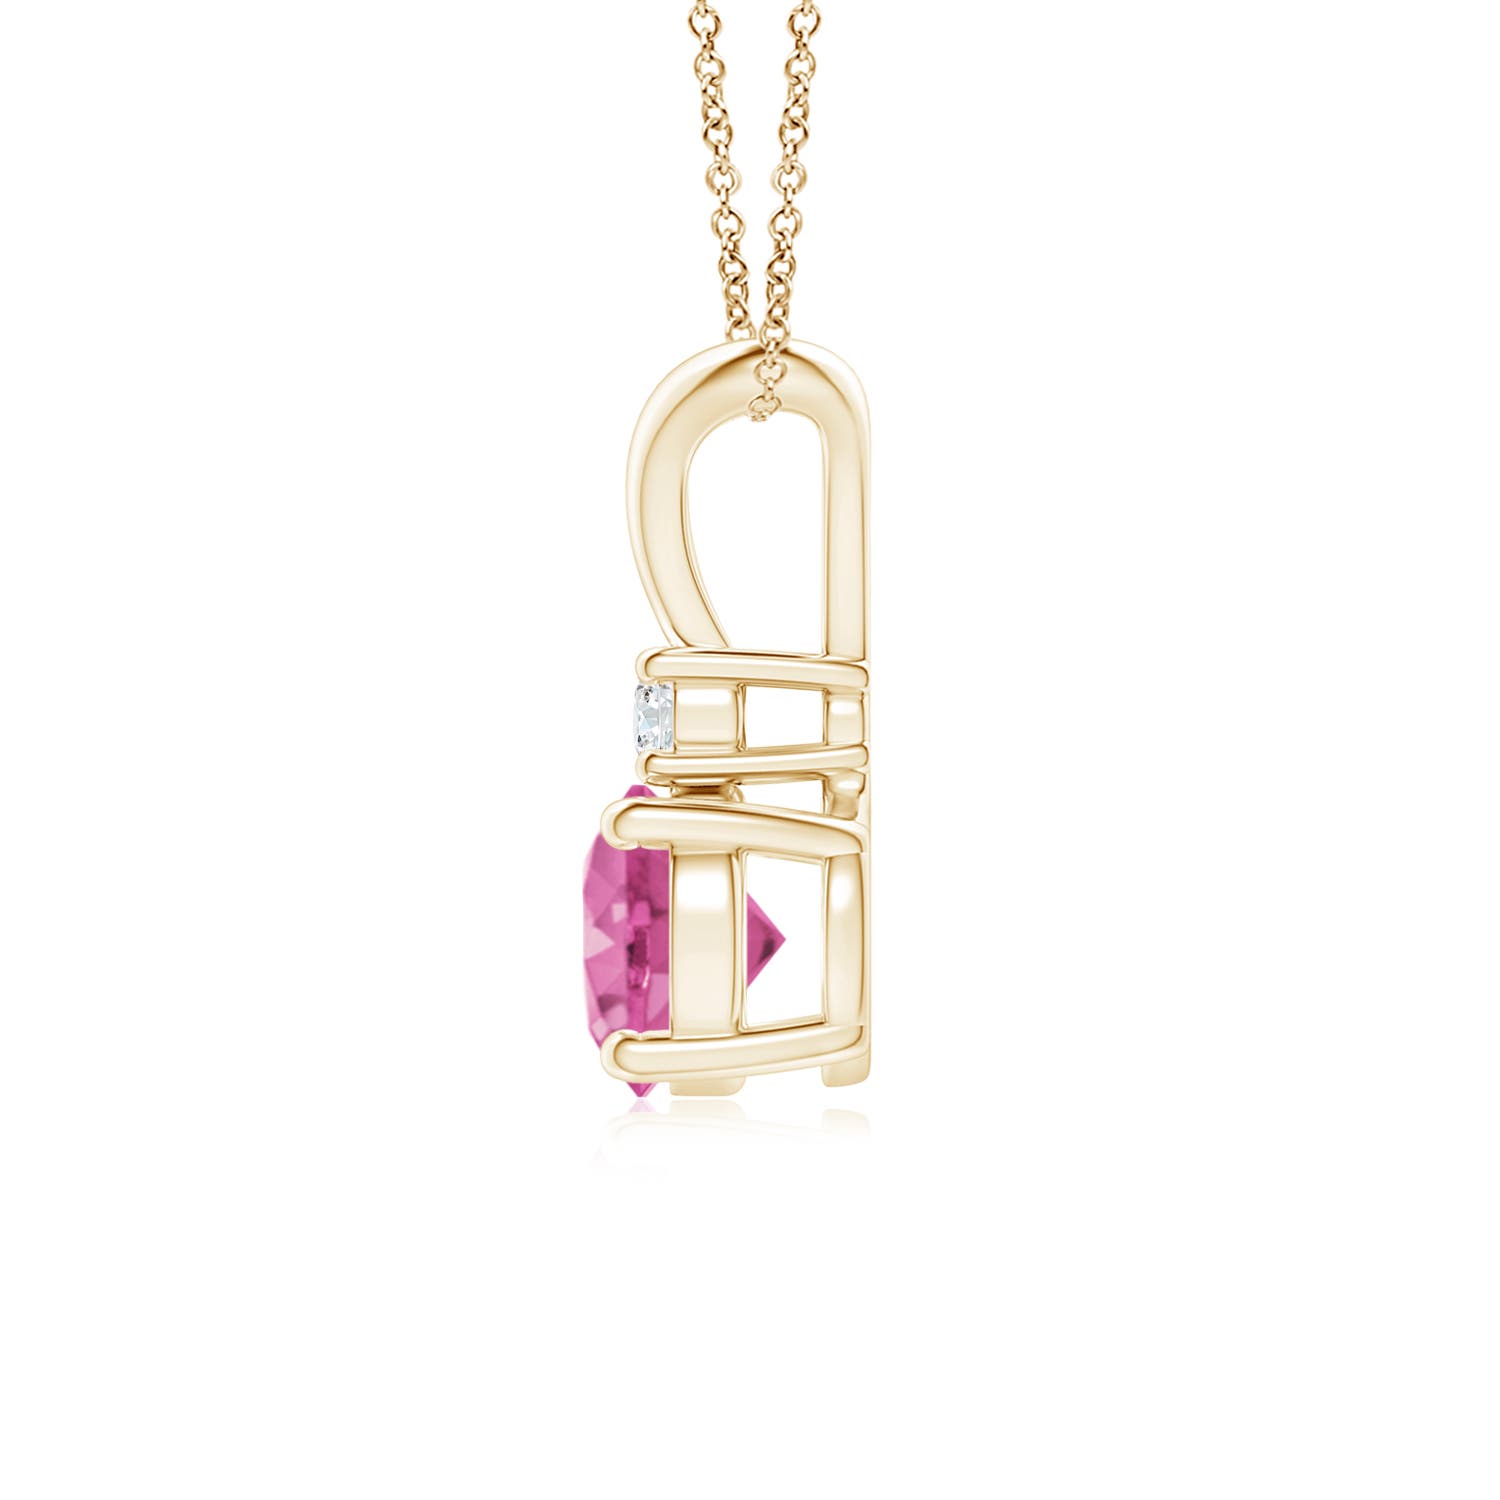 AAA - Pink Sapphire / 1.04 CT / 14 KT Yellow Gold